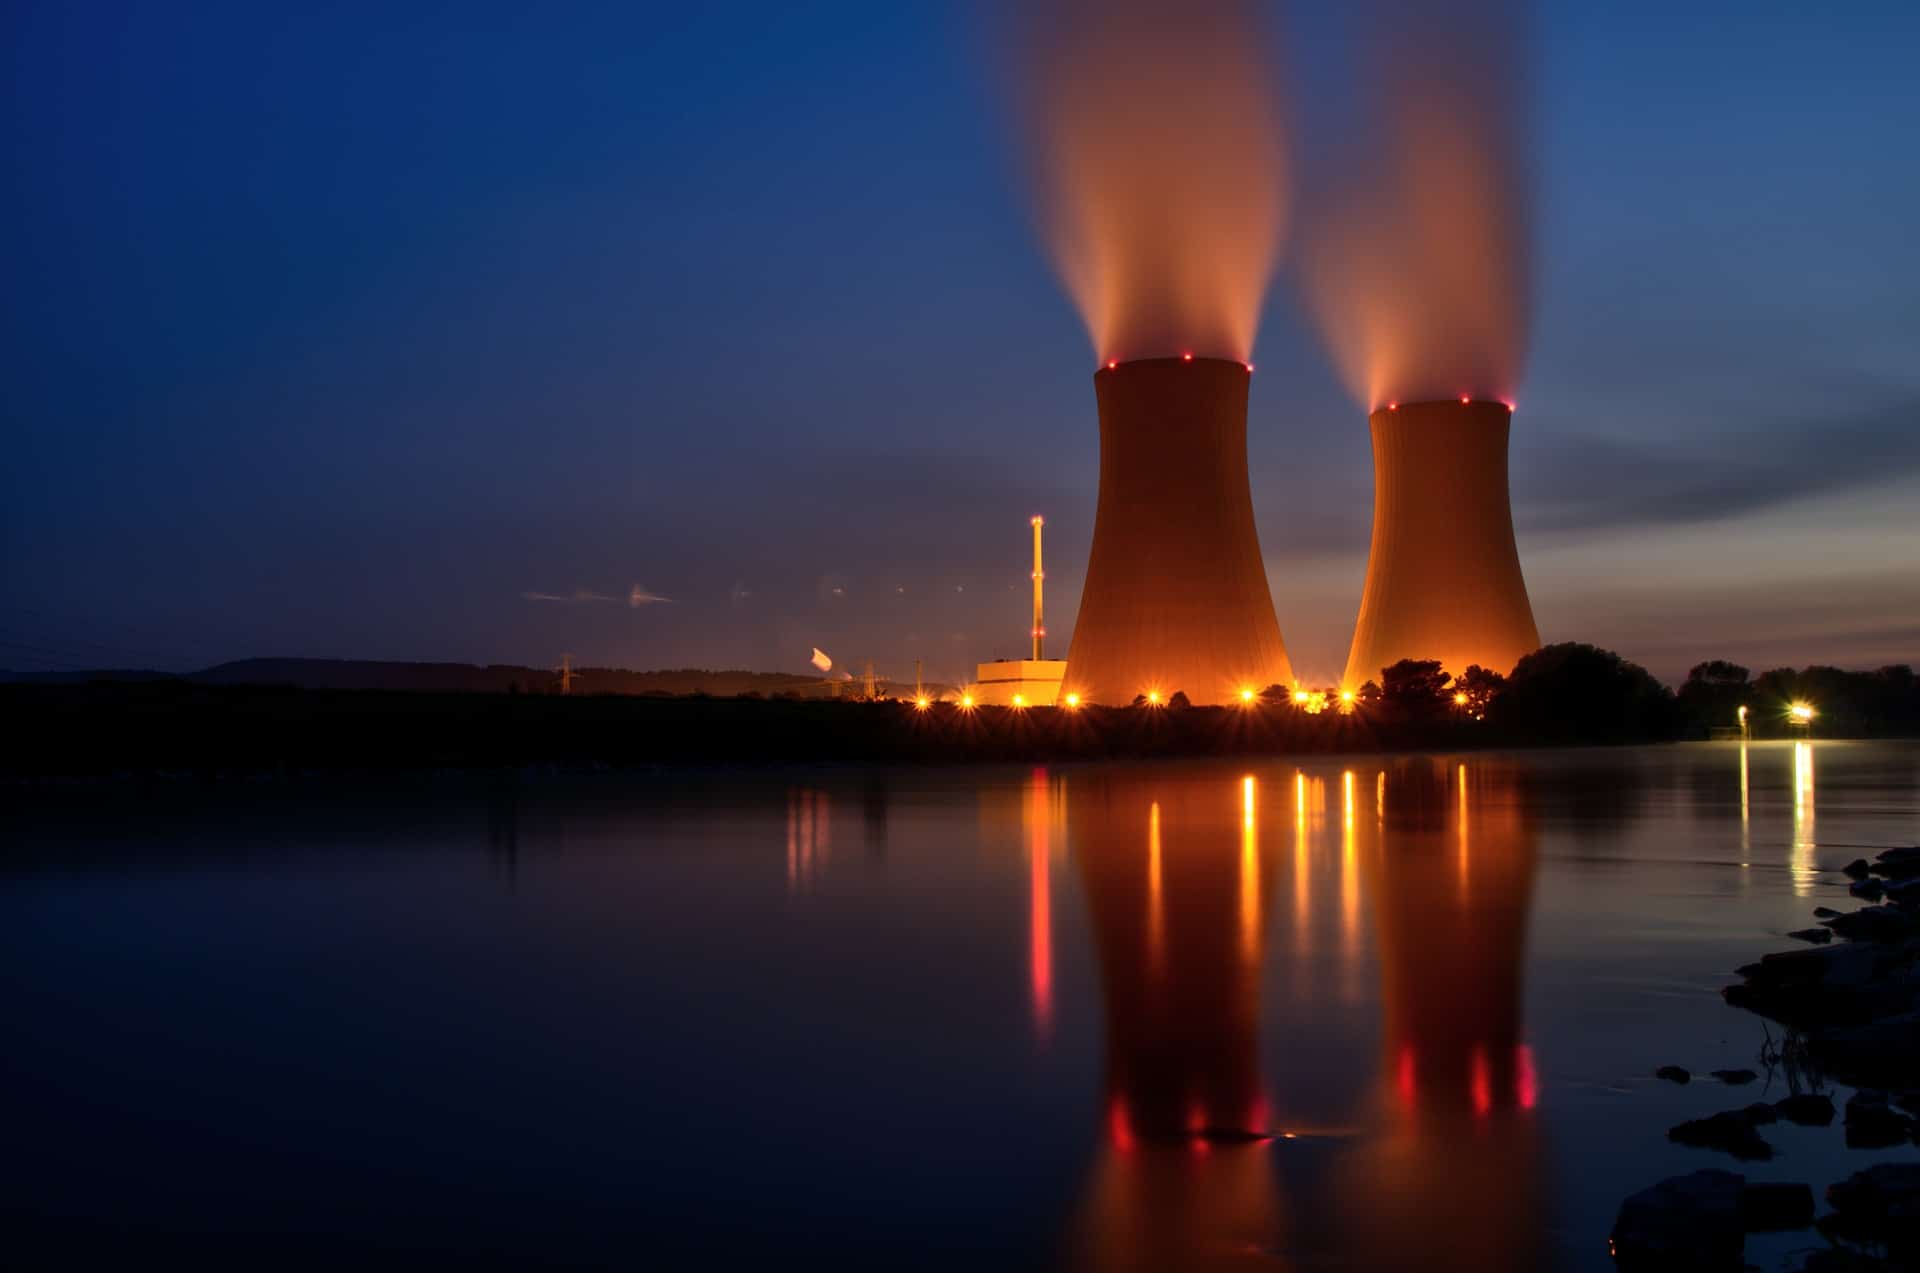 Nuclear power is not a viable solution for Green New Deal